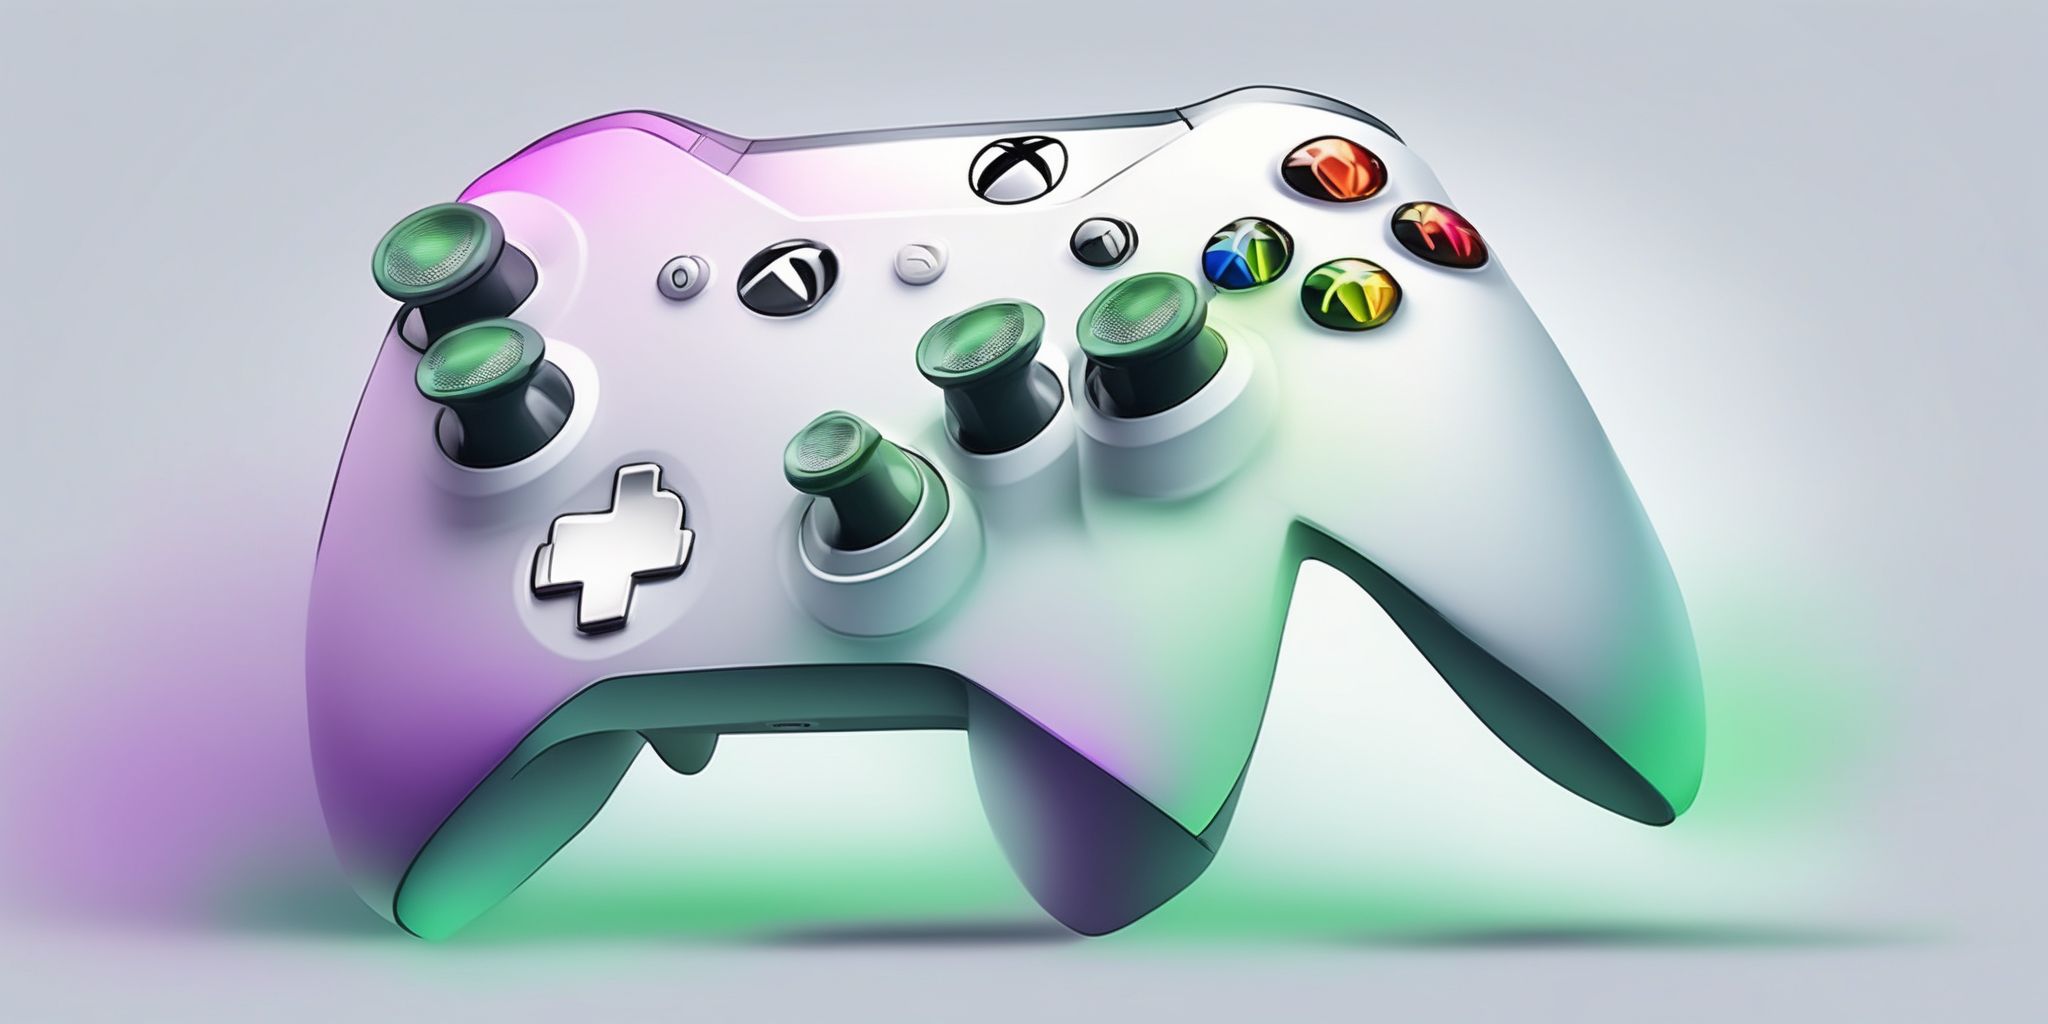 Xbox in illustration style with gradients and white background